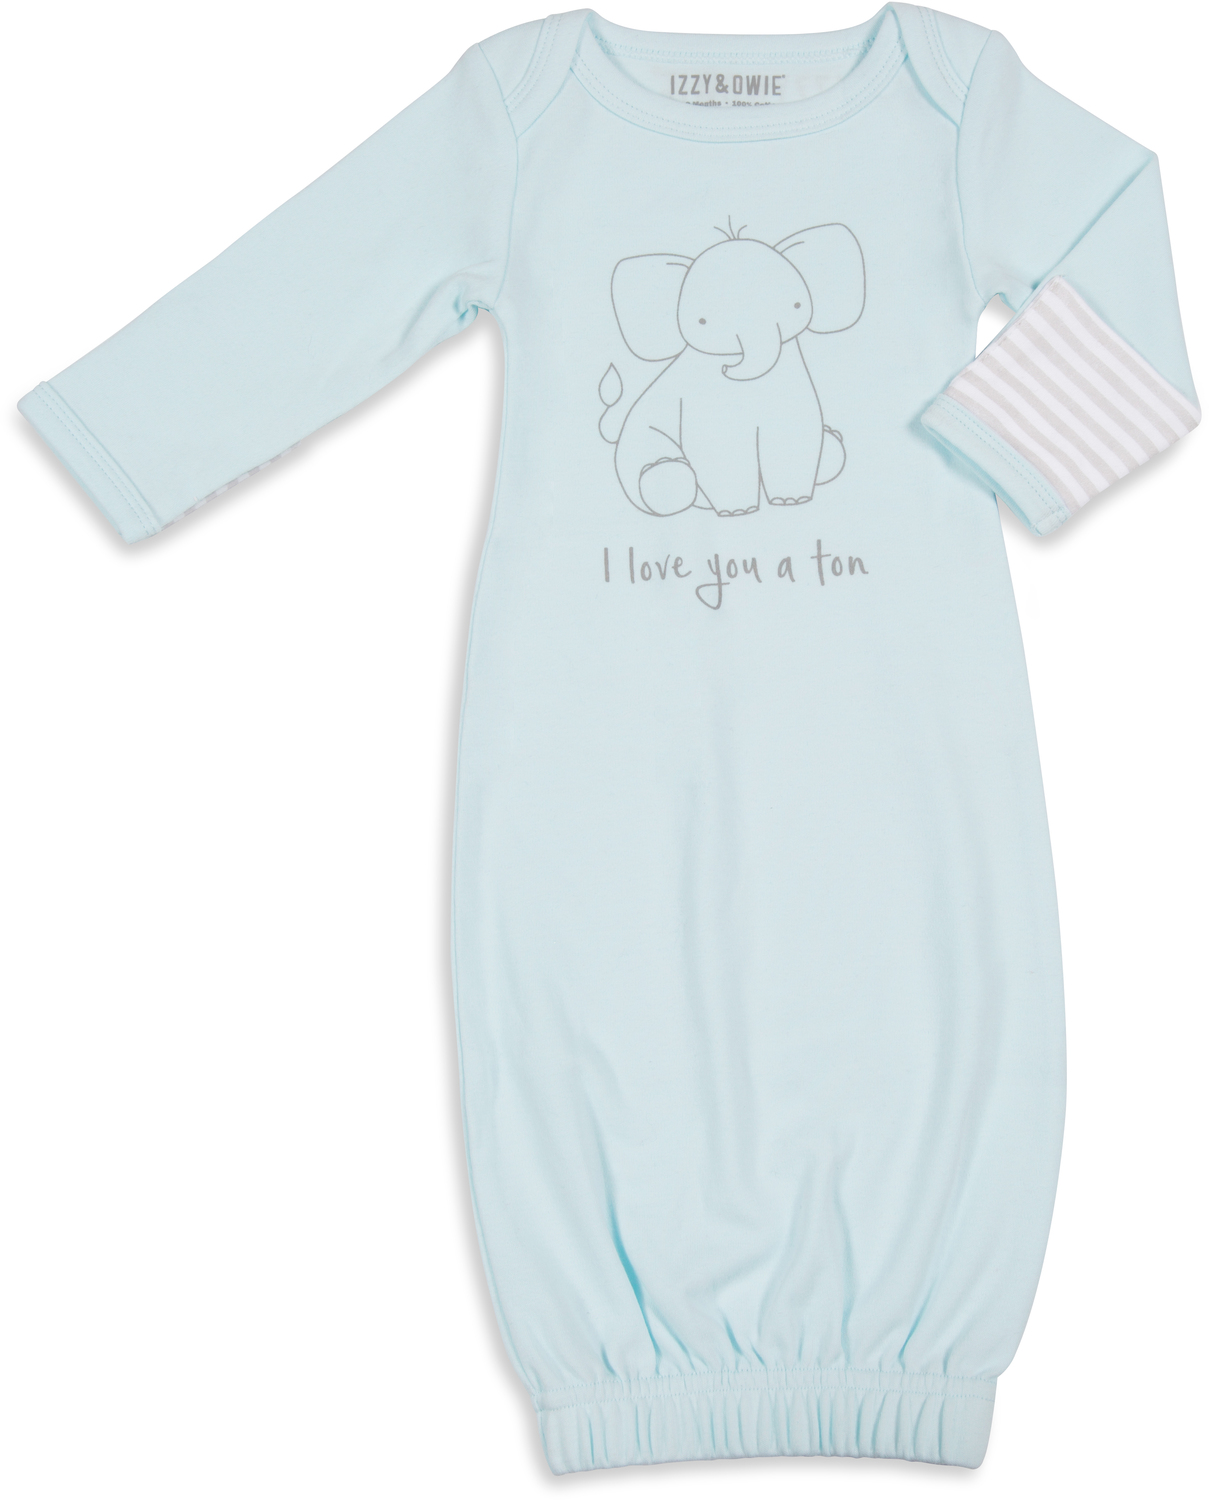 Soft Blue Elephant by Izzy & Owie - Soft Blue Elephant - 0-3 Months Gown with Mitten Cuffs